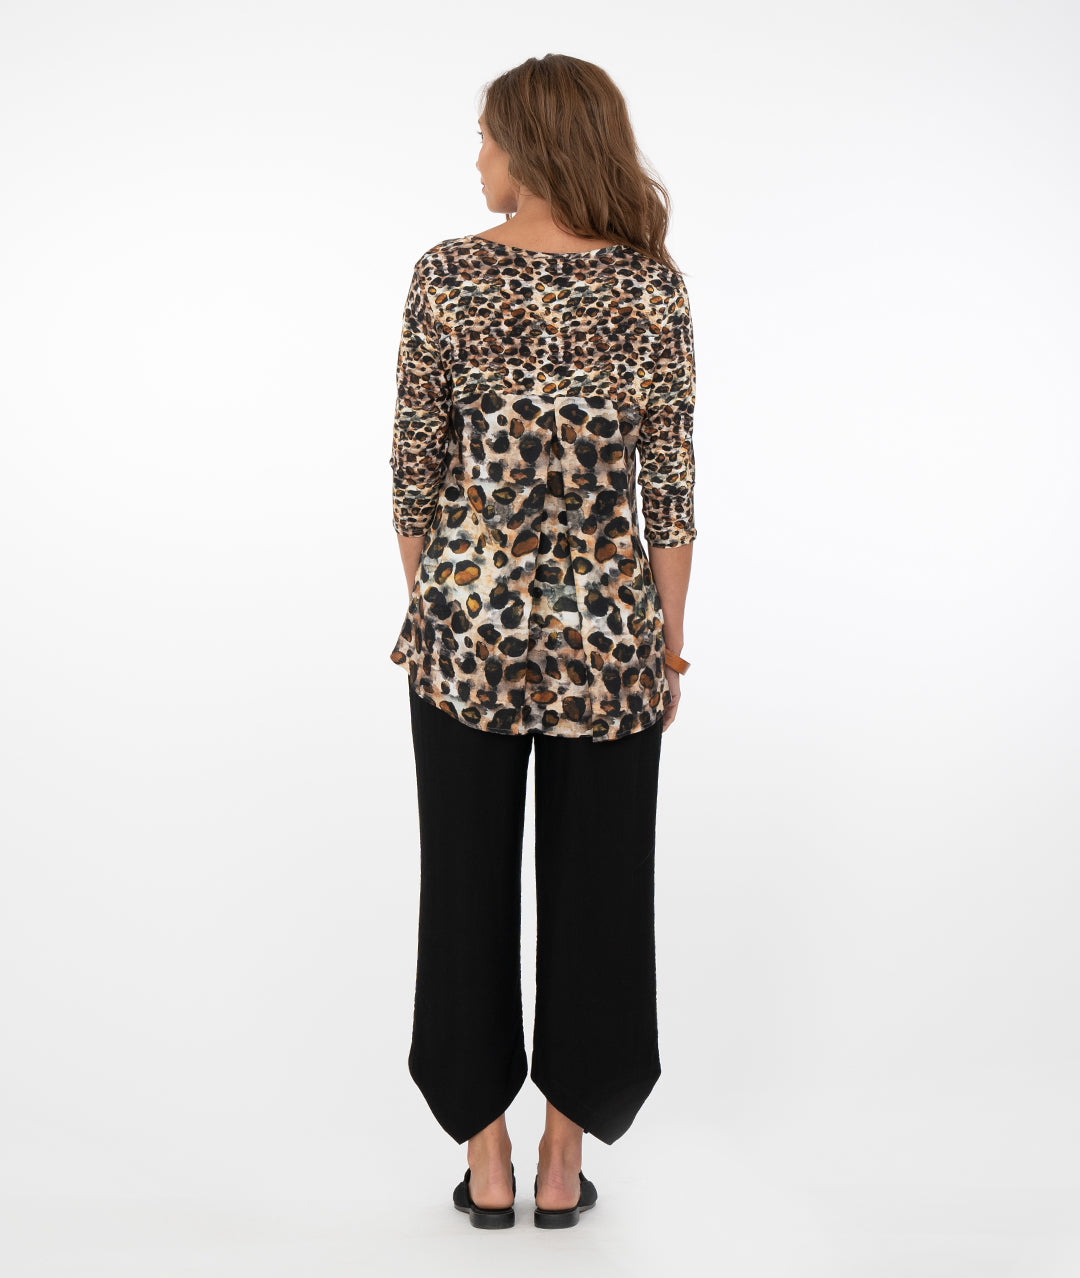 brunette model in a safari print top with black pants in front of a white background